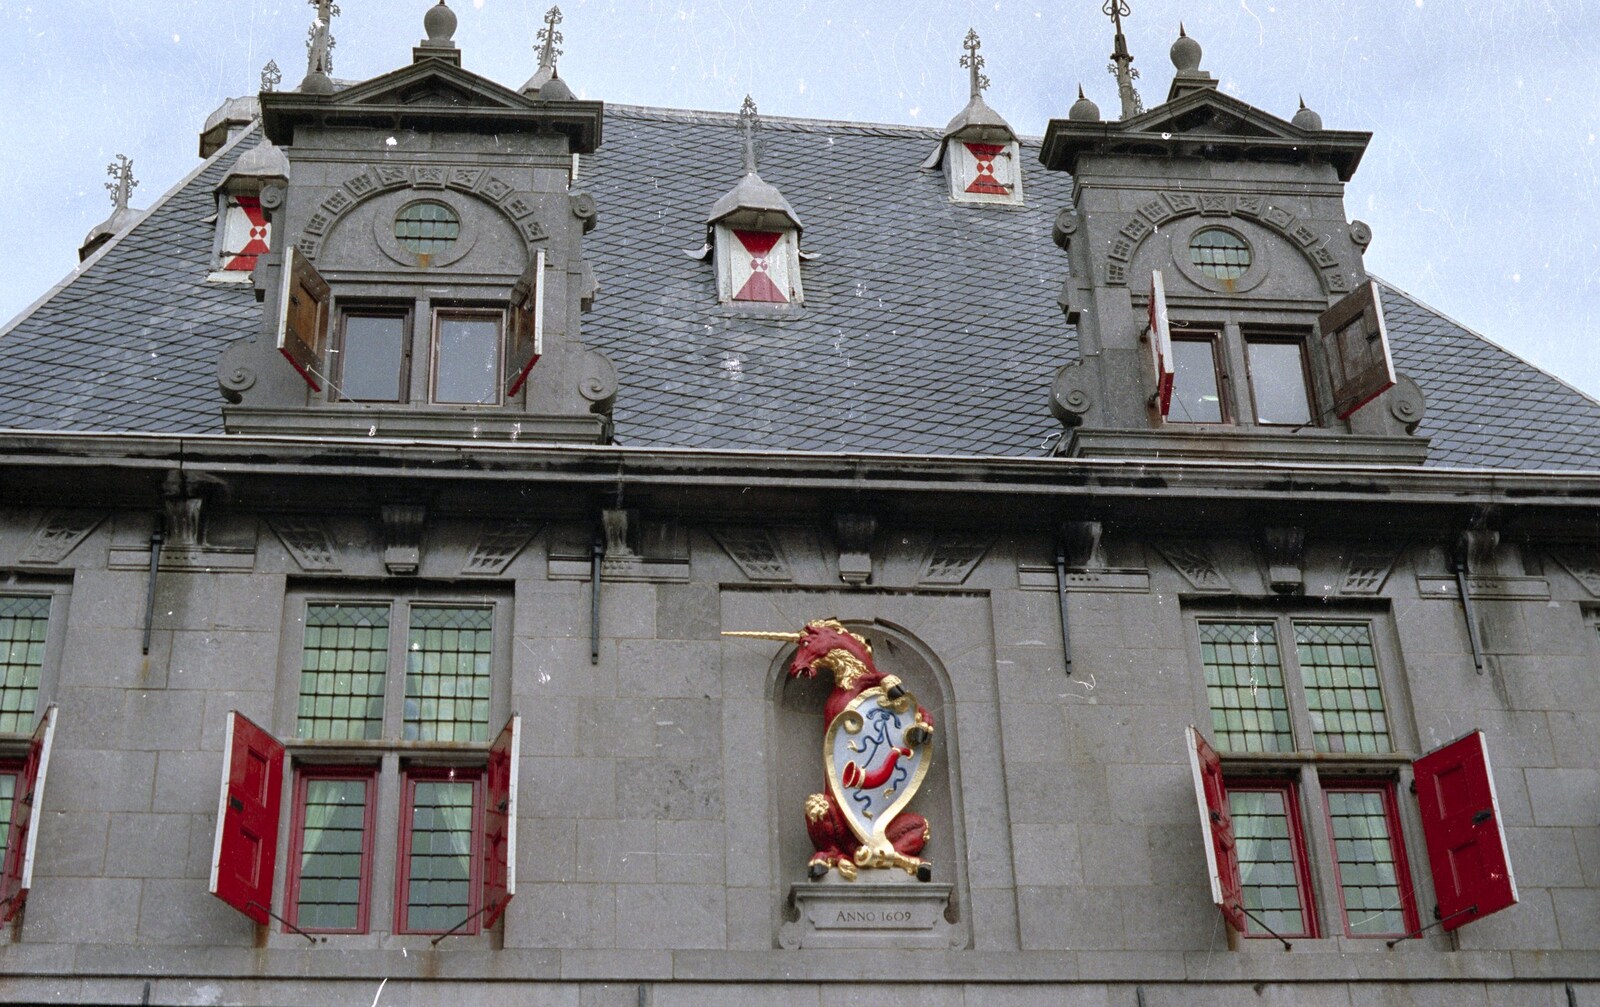 Out and About in Amsterdam, Hoorne, Vollendam and Edam, The Netherlands - 26th March 1992: Some sort of civic building